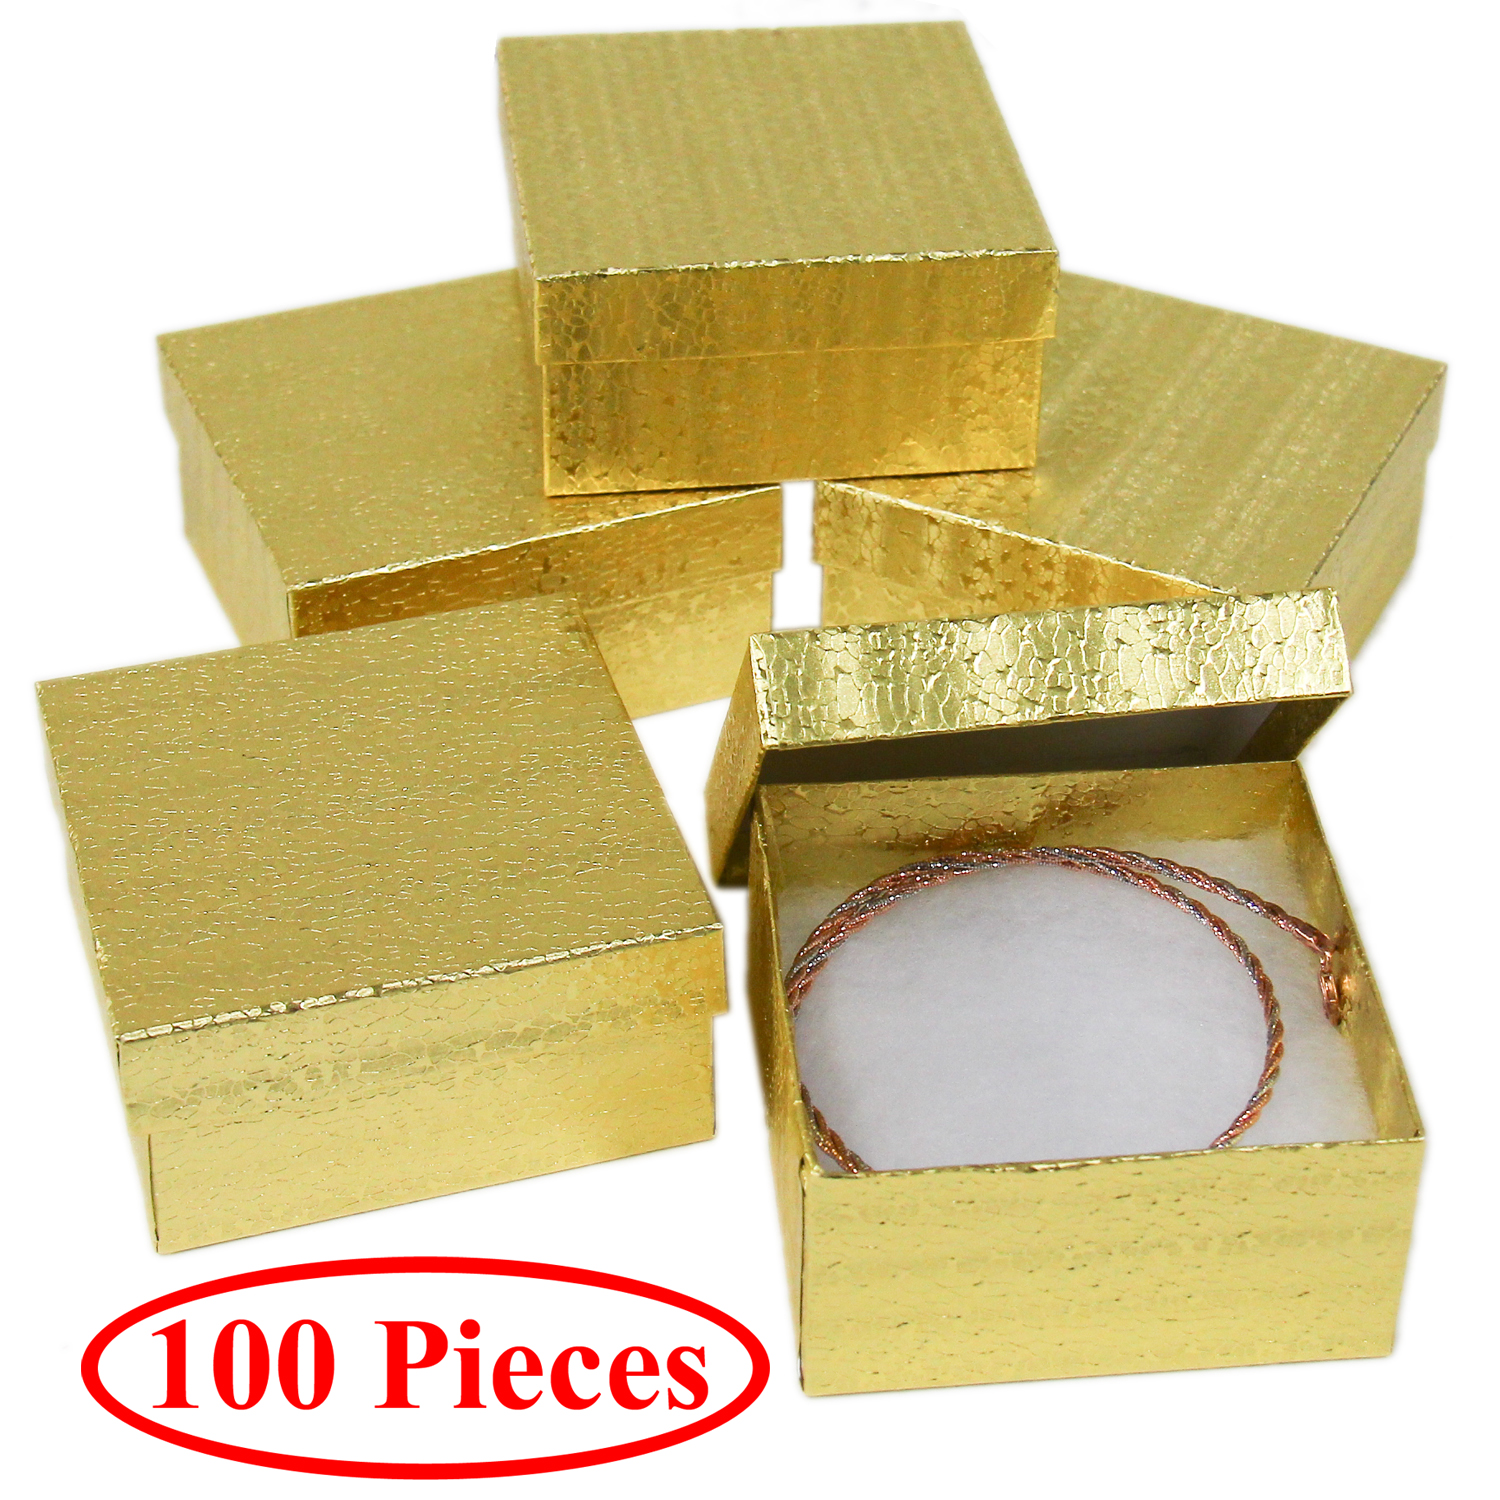 Wholesale 500 Gold Cotton Fill Jewelry Packaging Gift Boxes 3 1/2" x 3 1/2" x 1" 